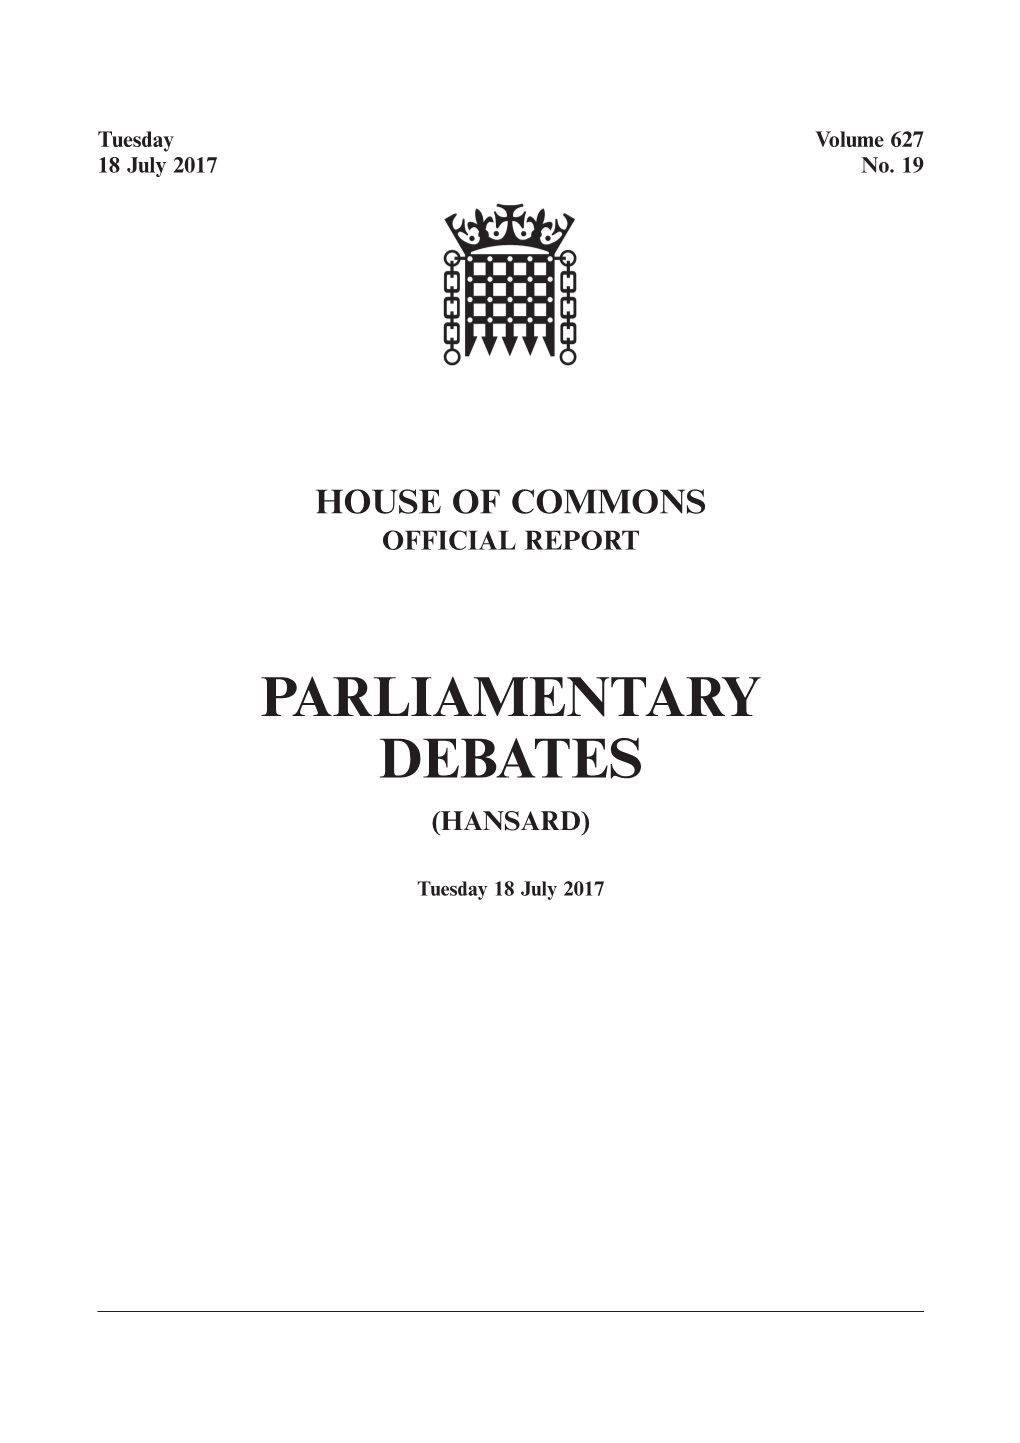 Whole Day Download the Hansard Record of the Entire Day in PDF